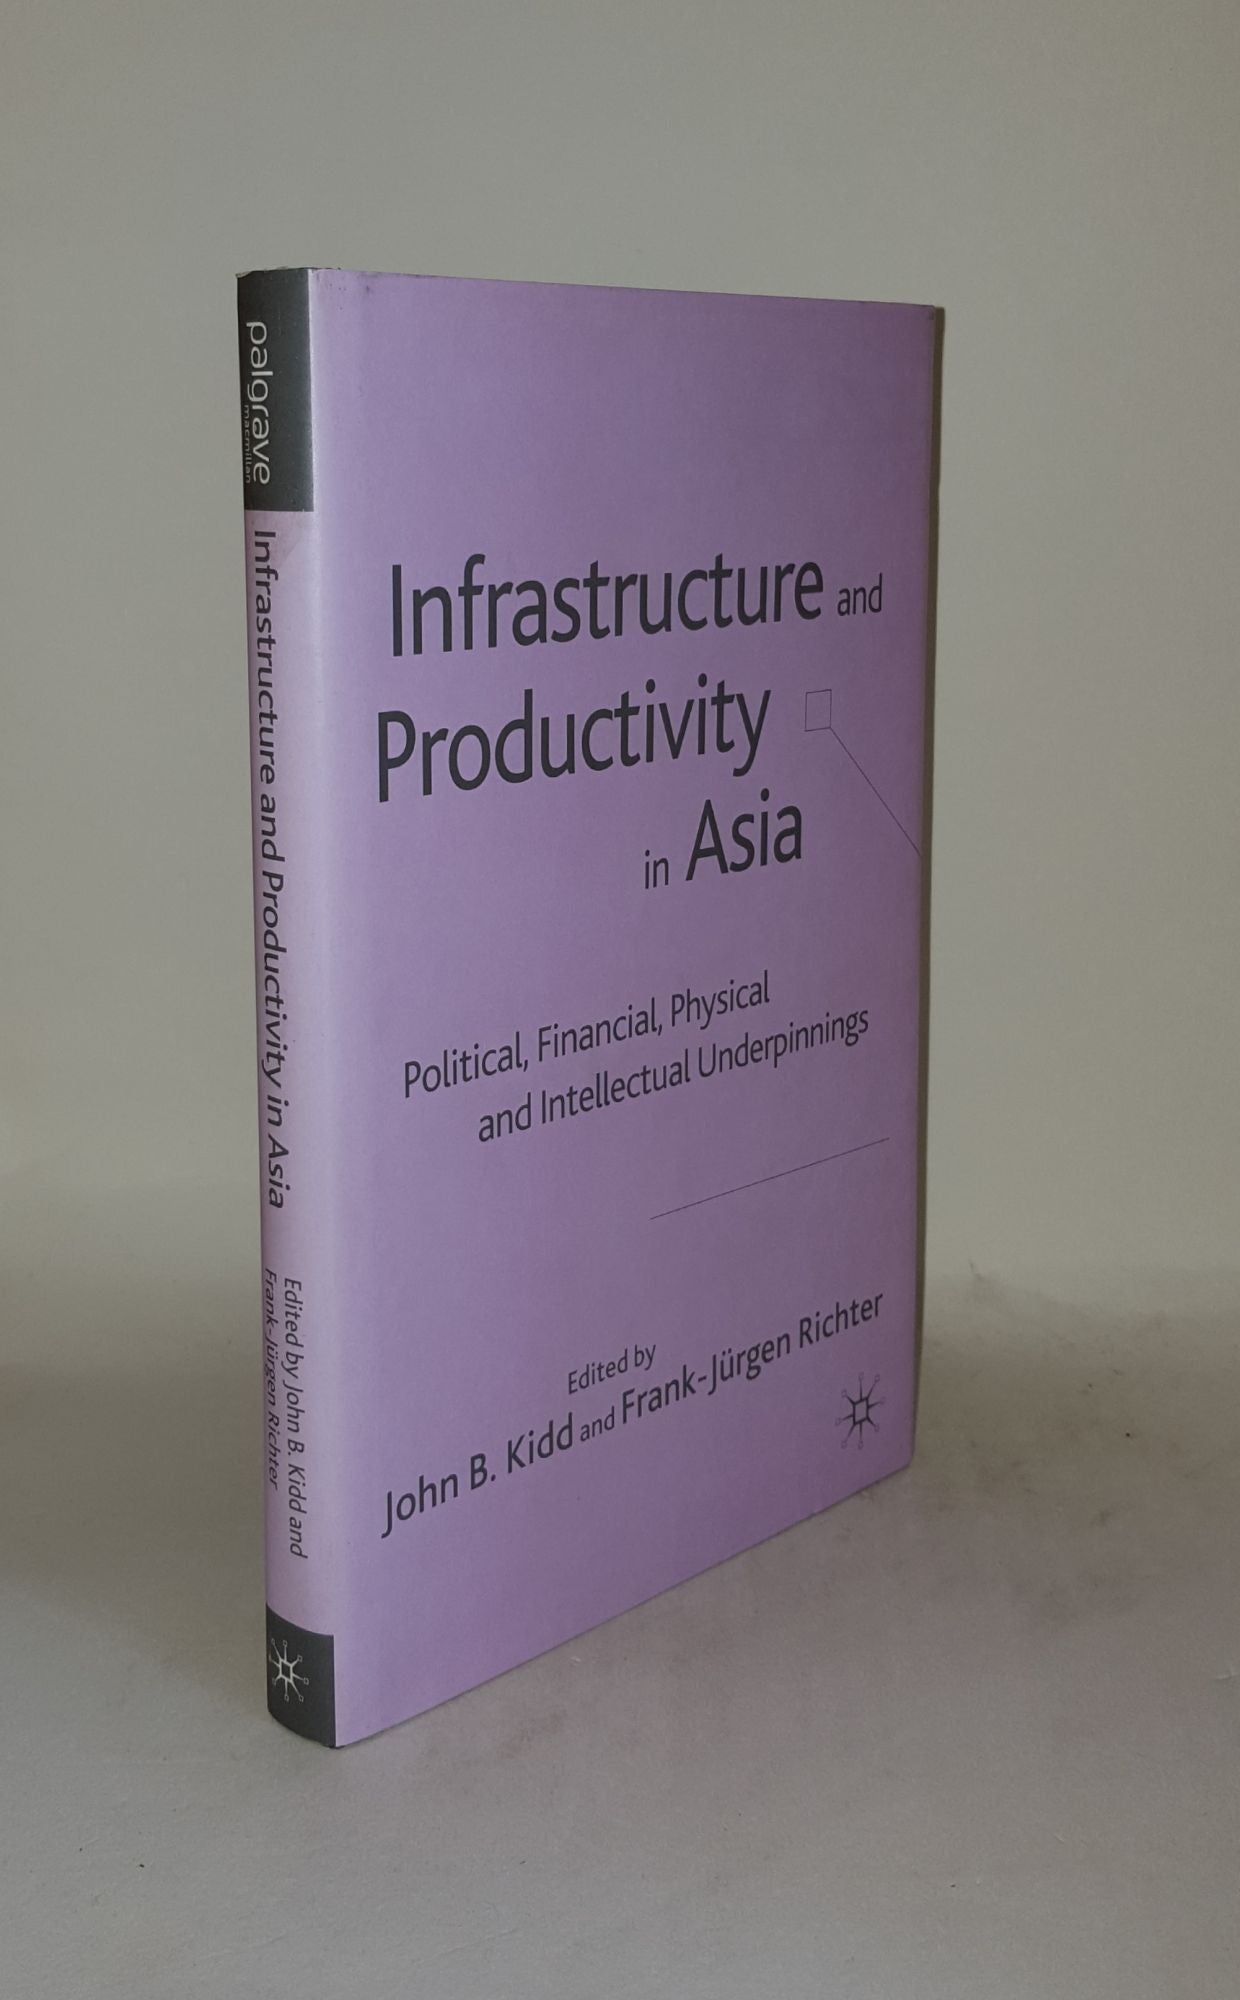 KIDD John B., RICHTER Frank-Jurgen - Infrastructure and Productivity in Asia Political Financial Physical and Intellectual Underpinnings